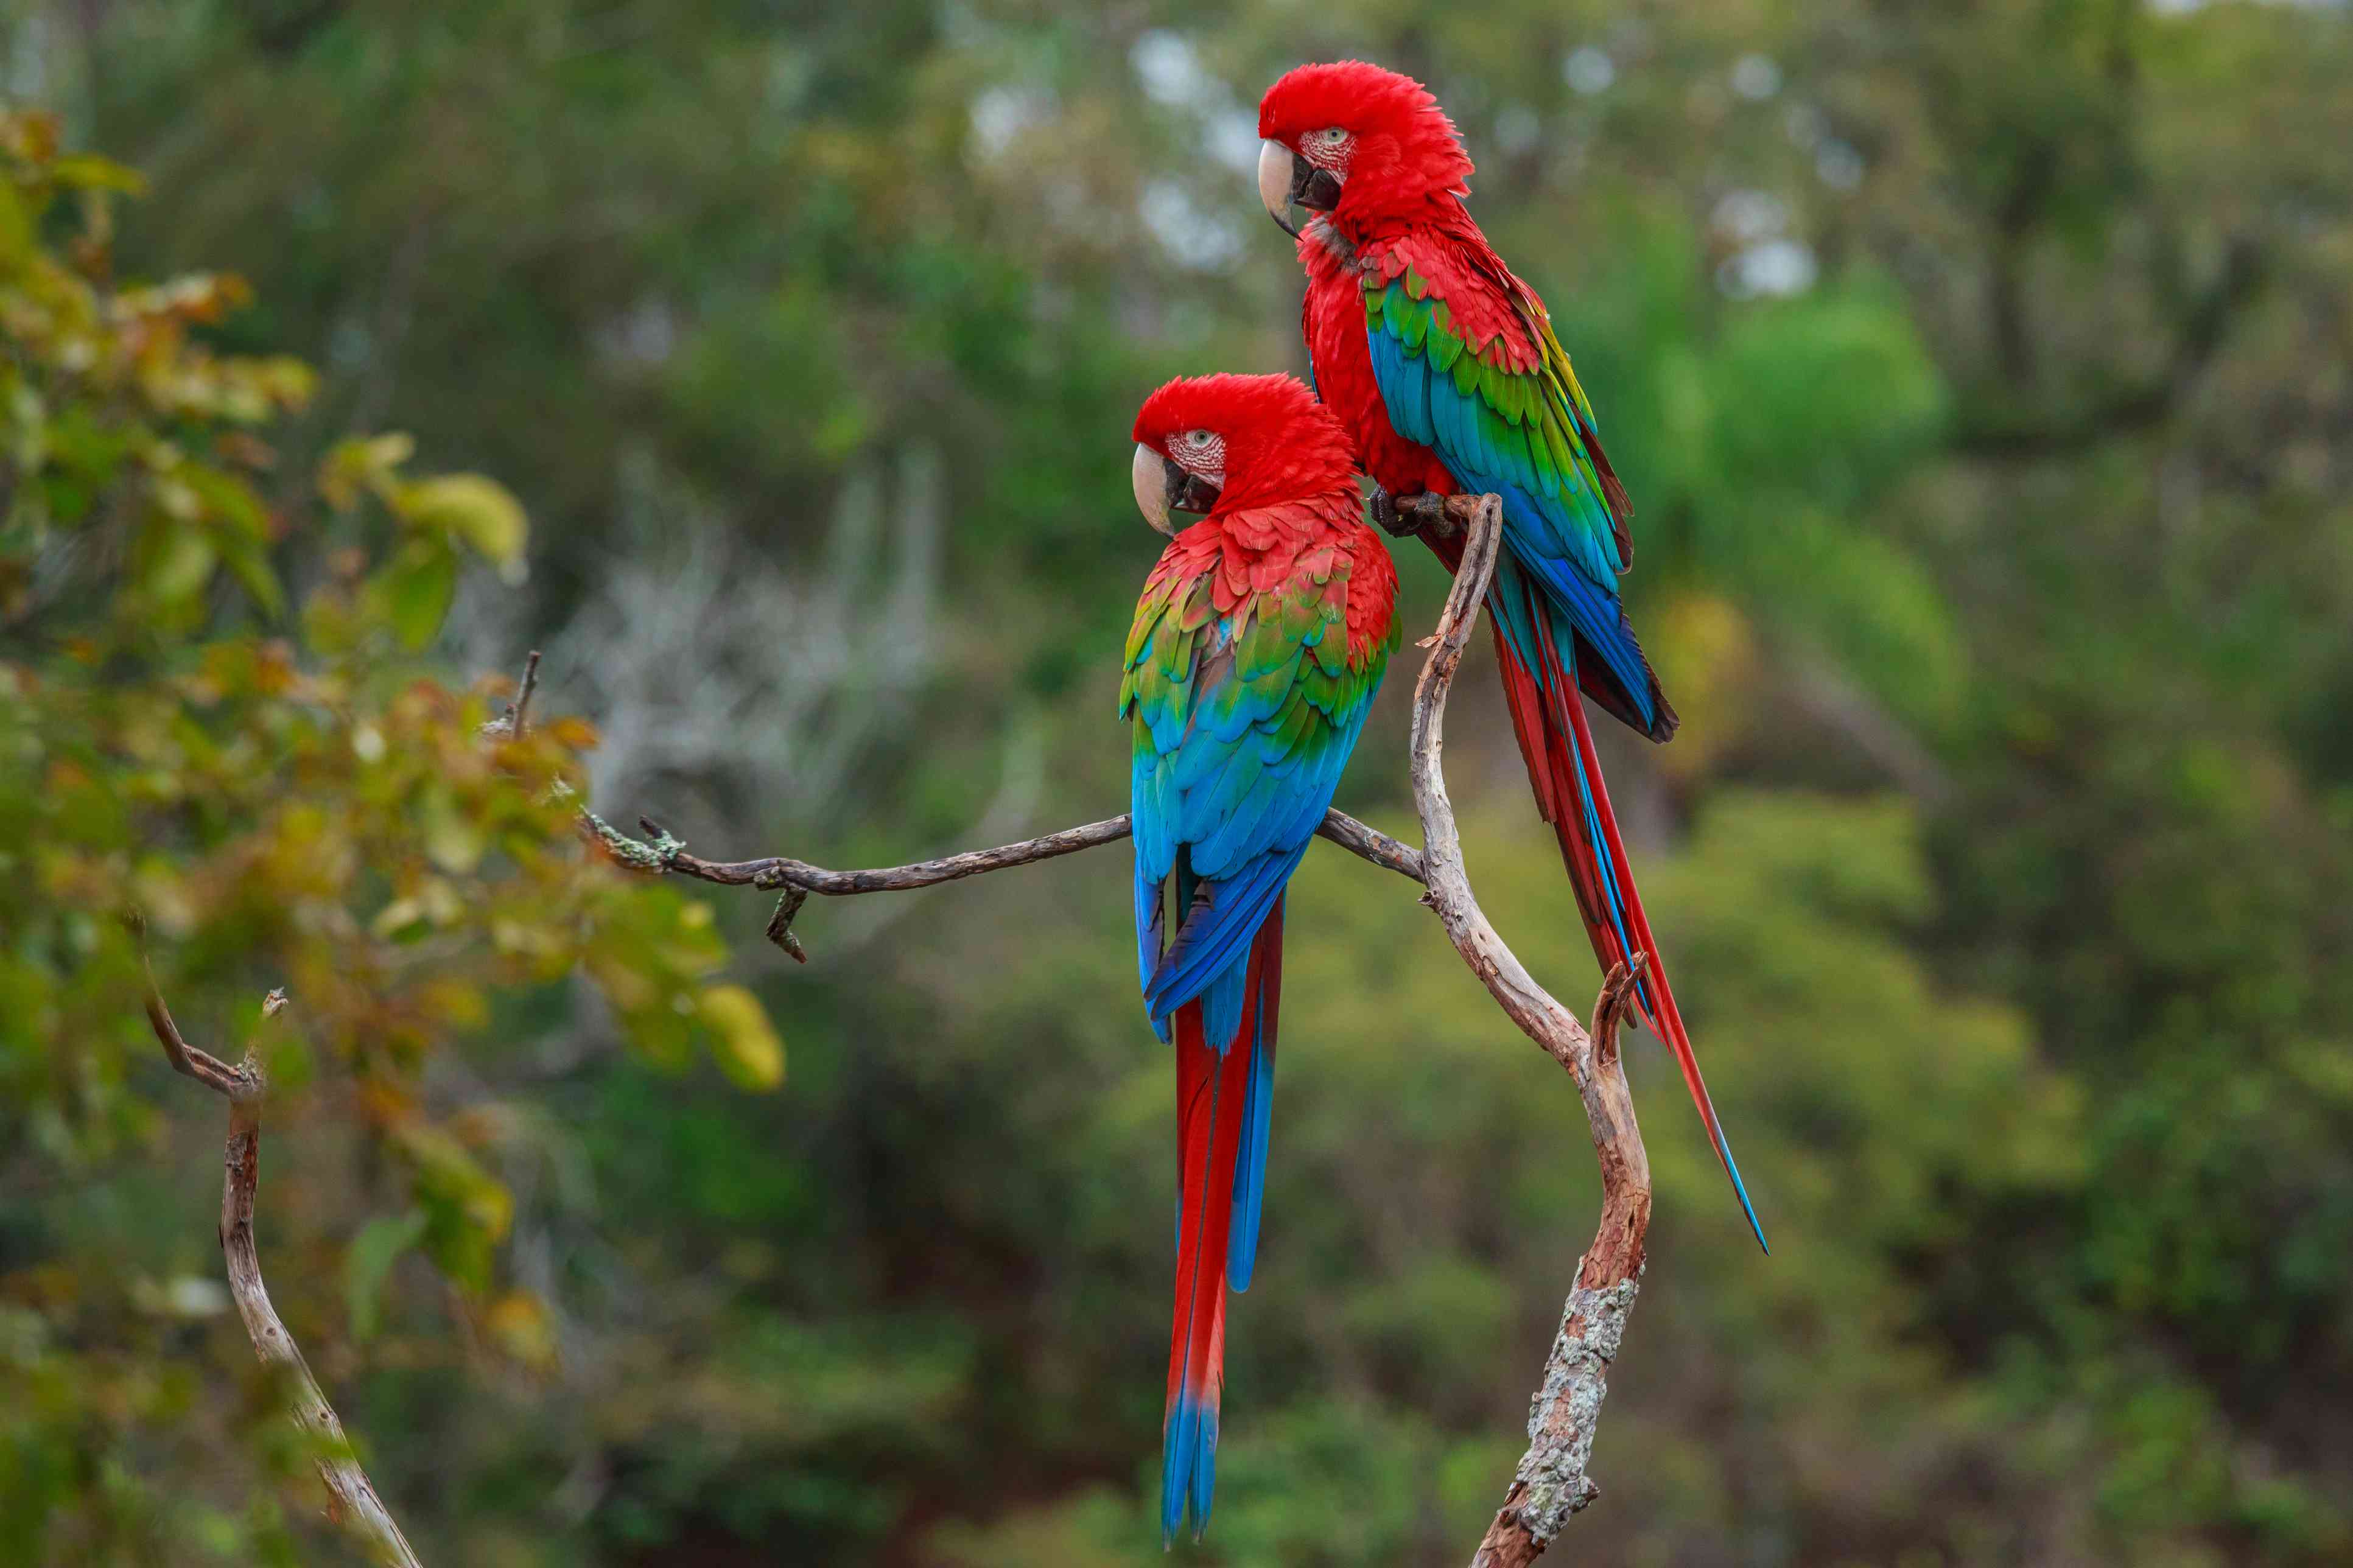 Red-and-green macaws in a tree